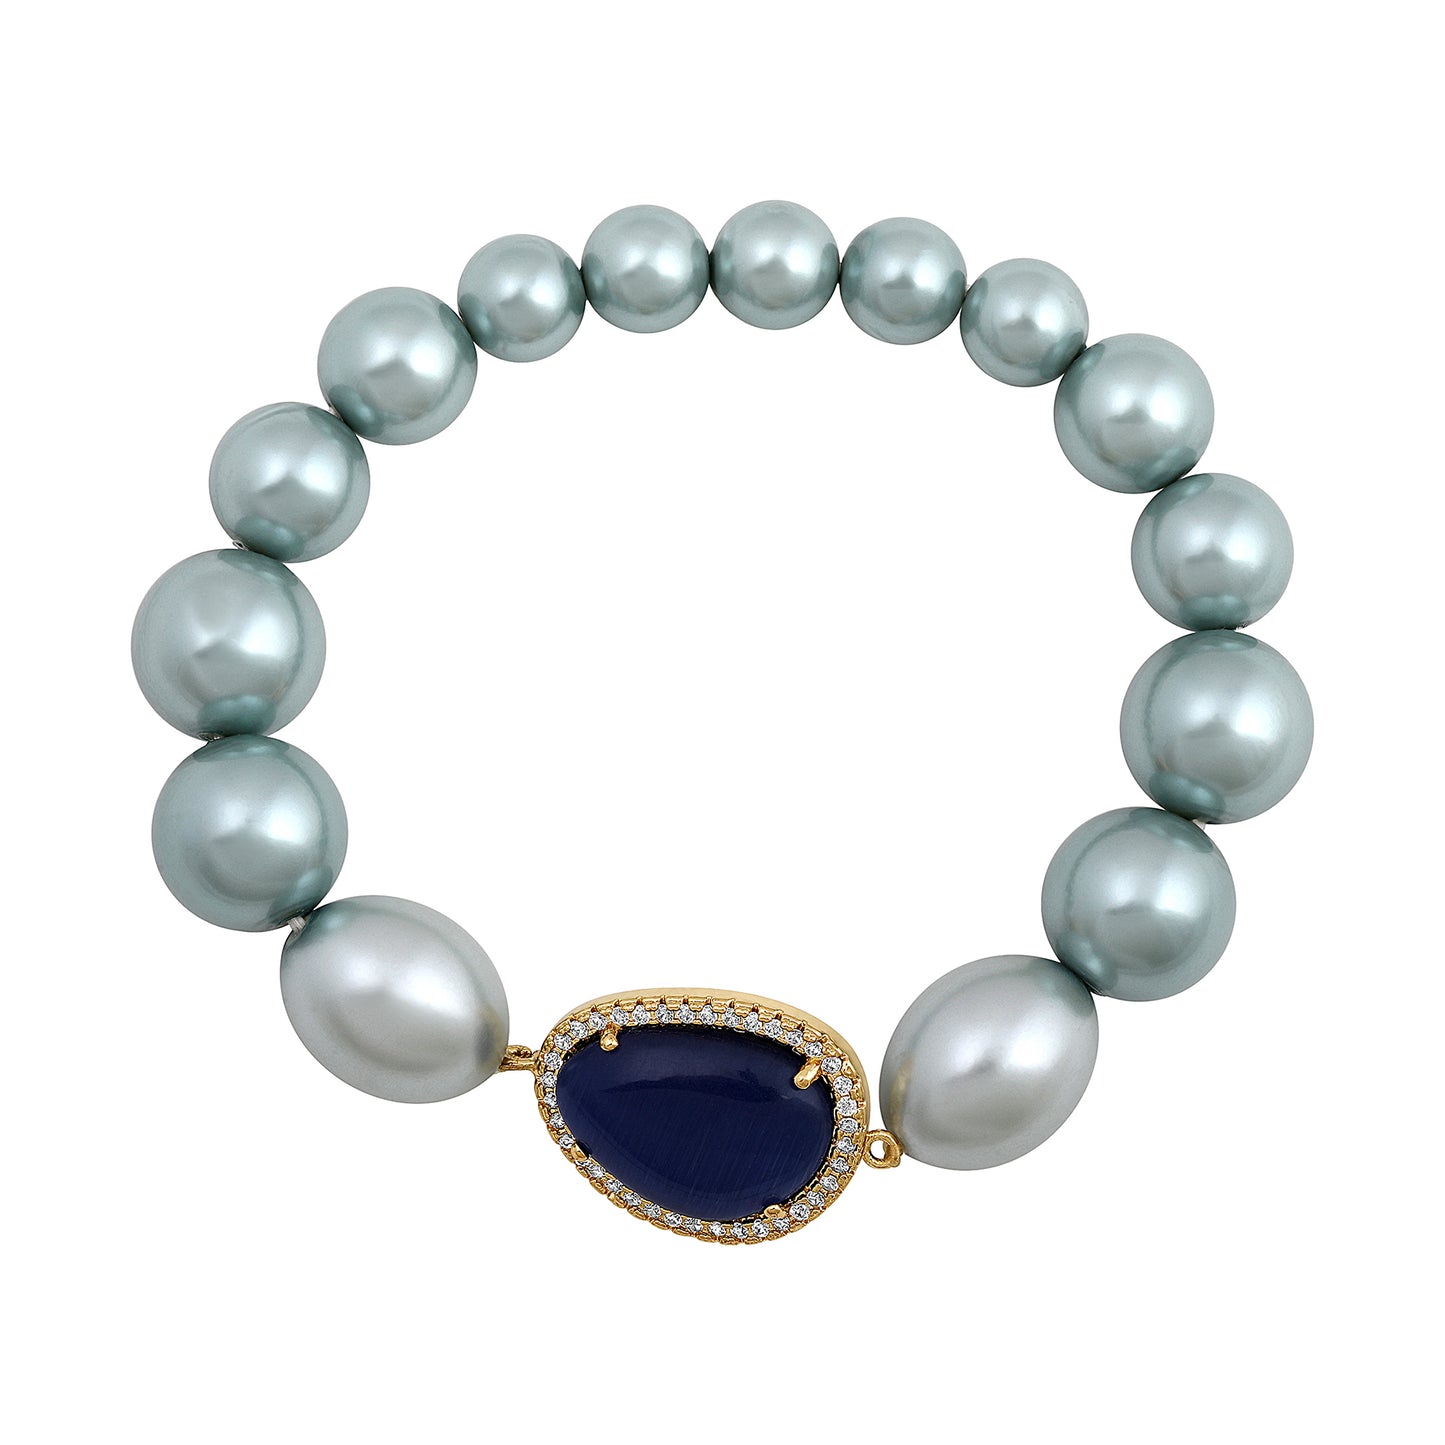 Bdiva Shell Pearl Bracelet with Blue Sapphire Stone.